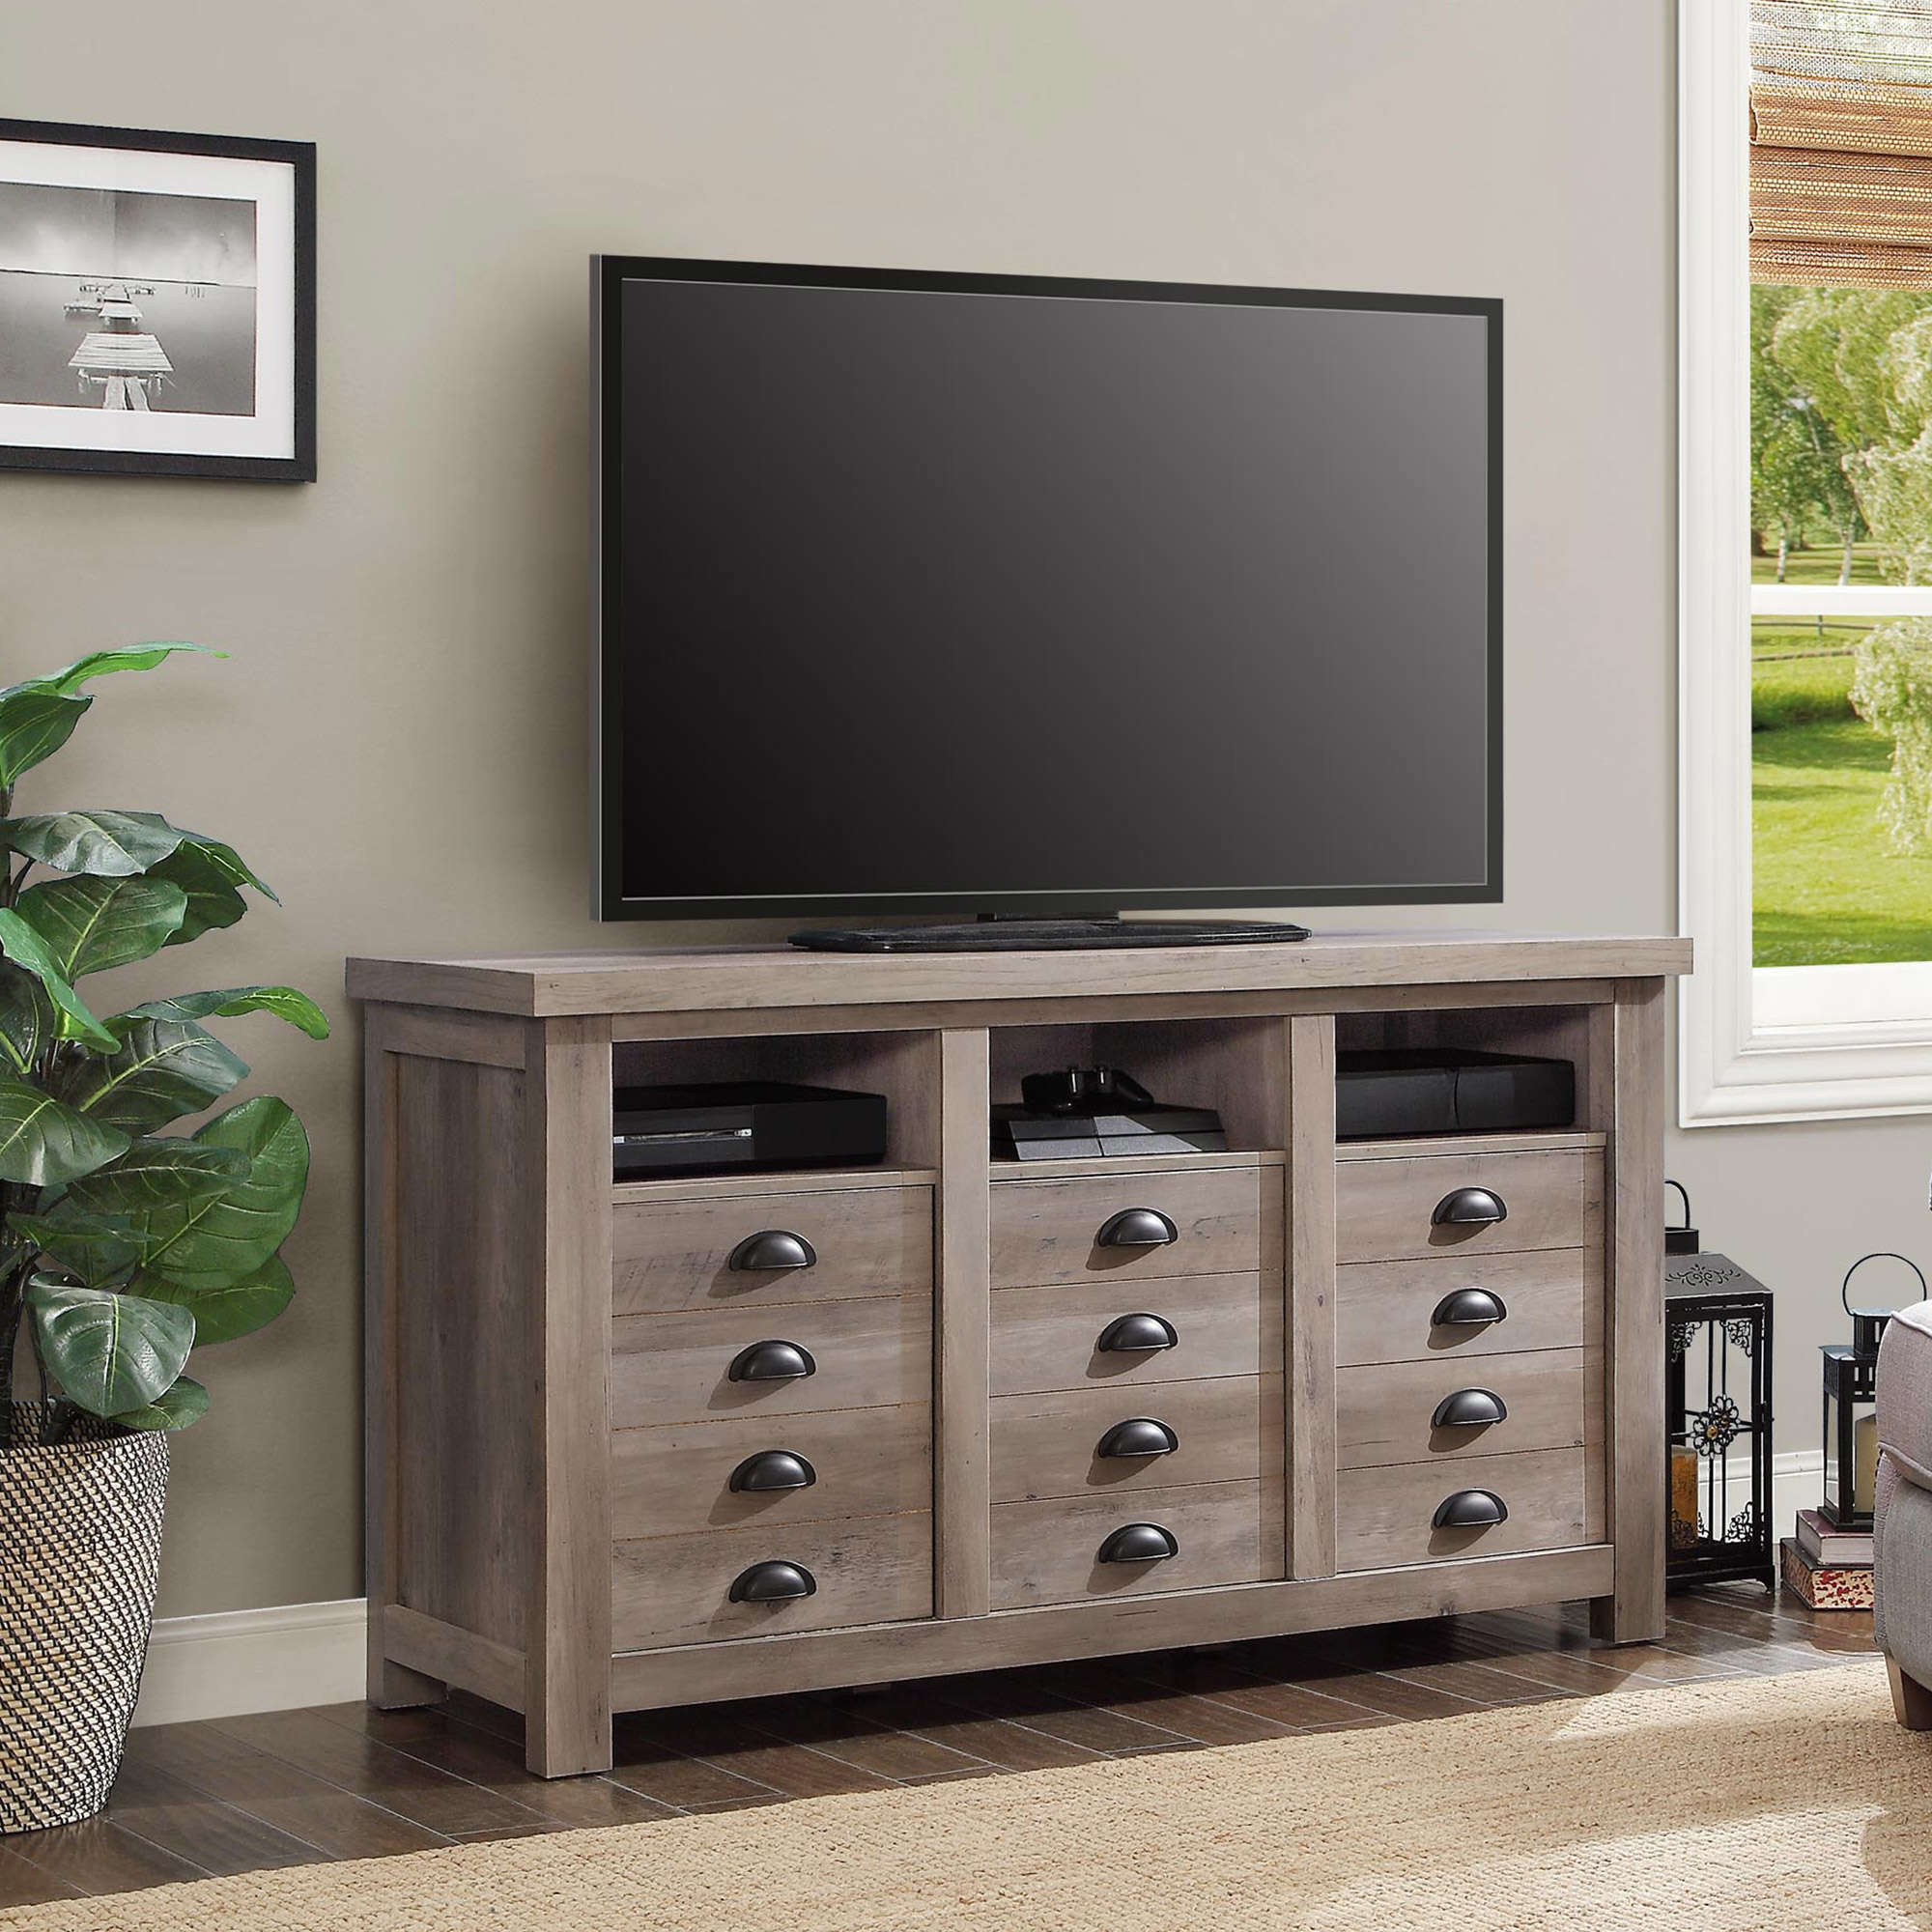 Better Homes and Gardens TV Cabinet ONLY $145 (Reg $269)